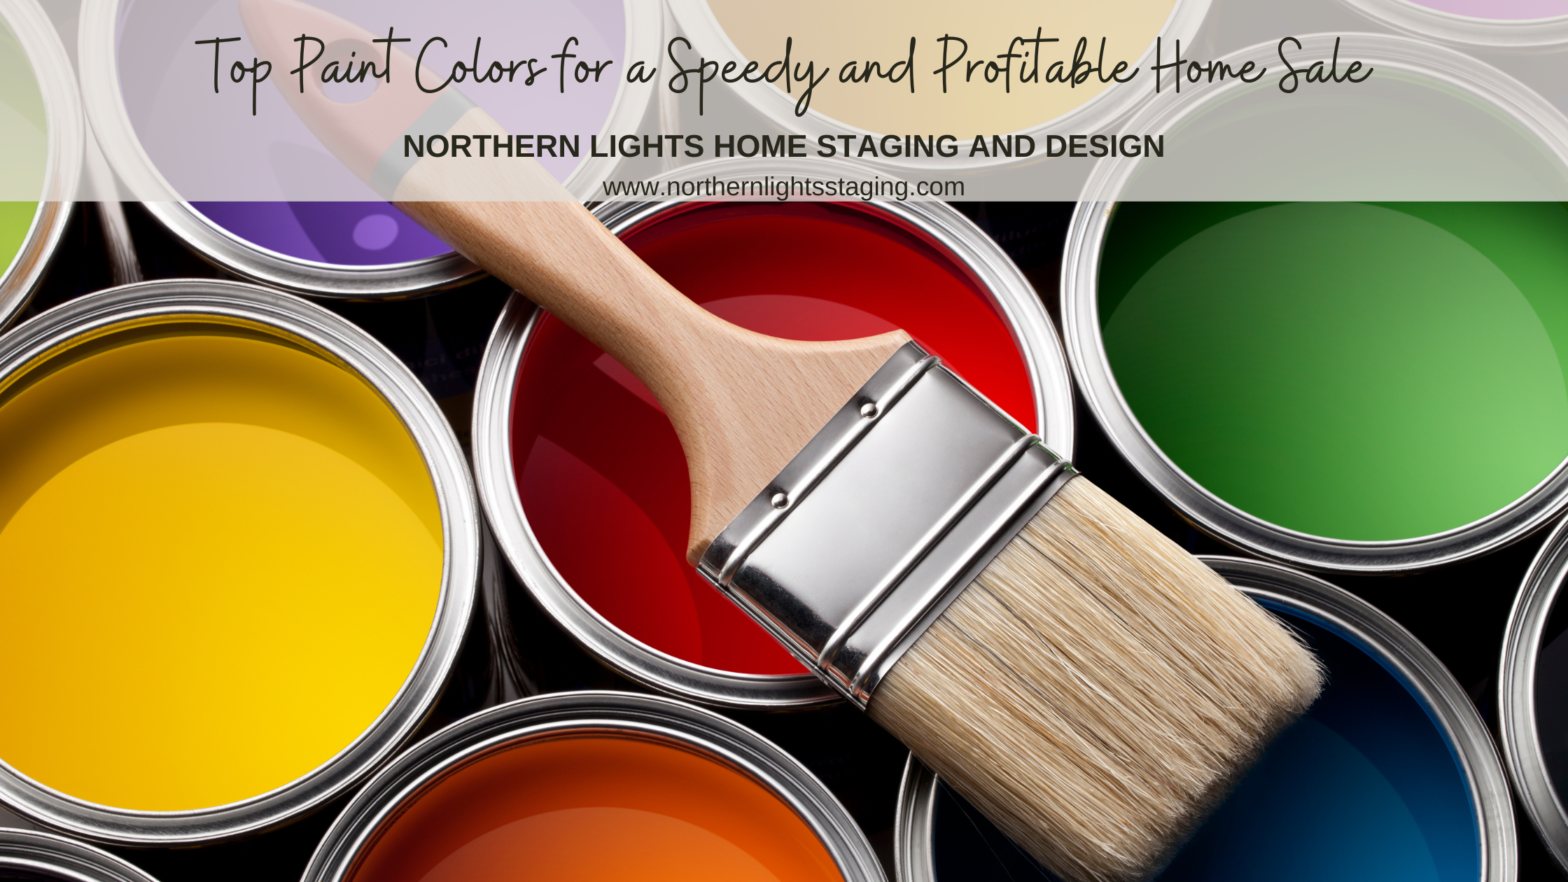 Top Paint Colors for a Speedy and Profitable Home Sale